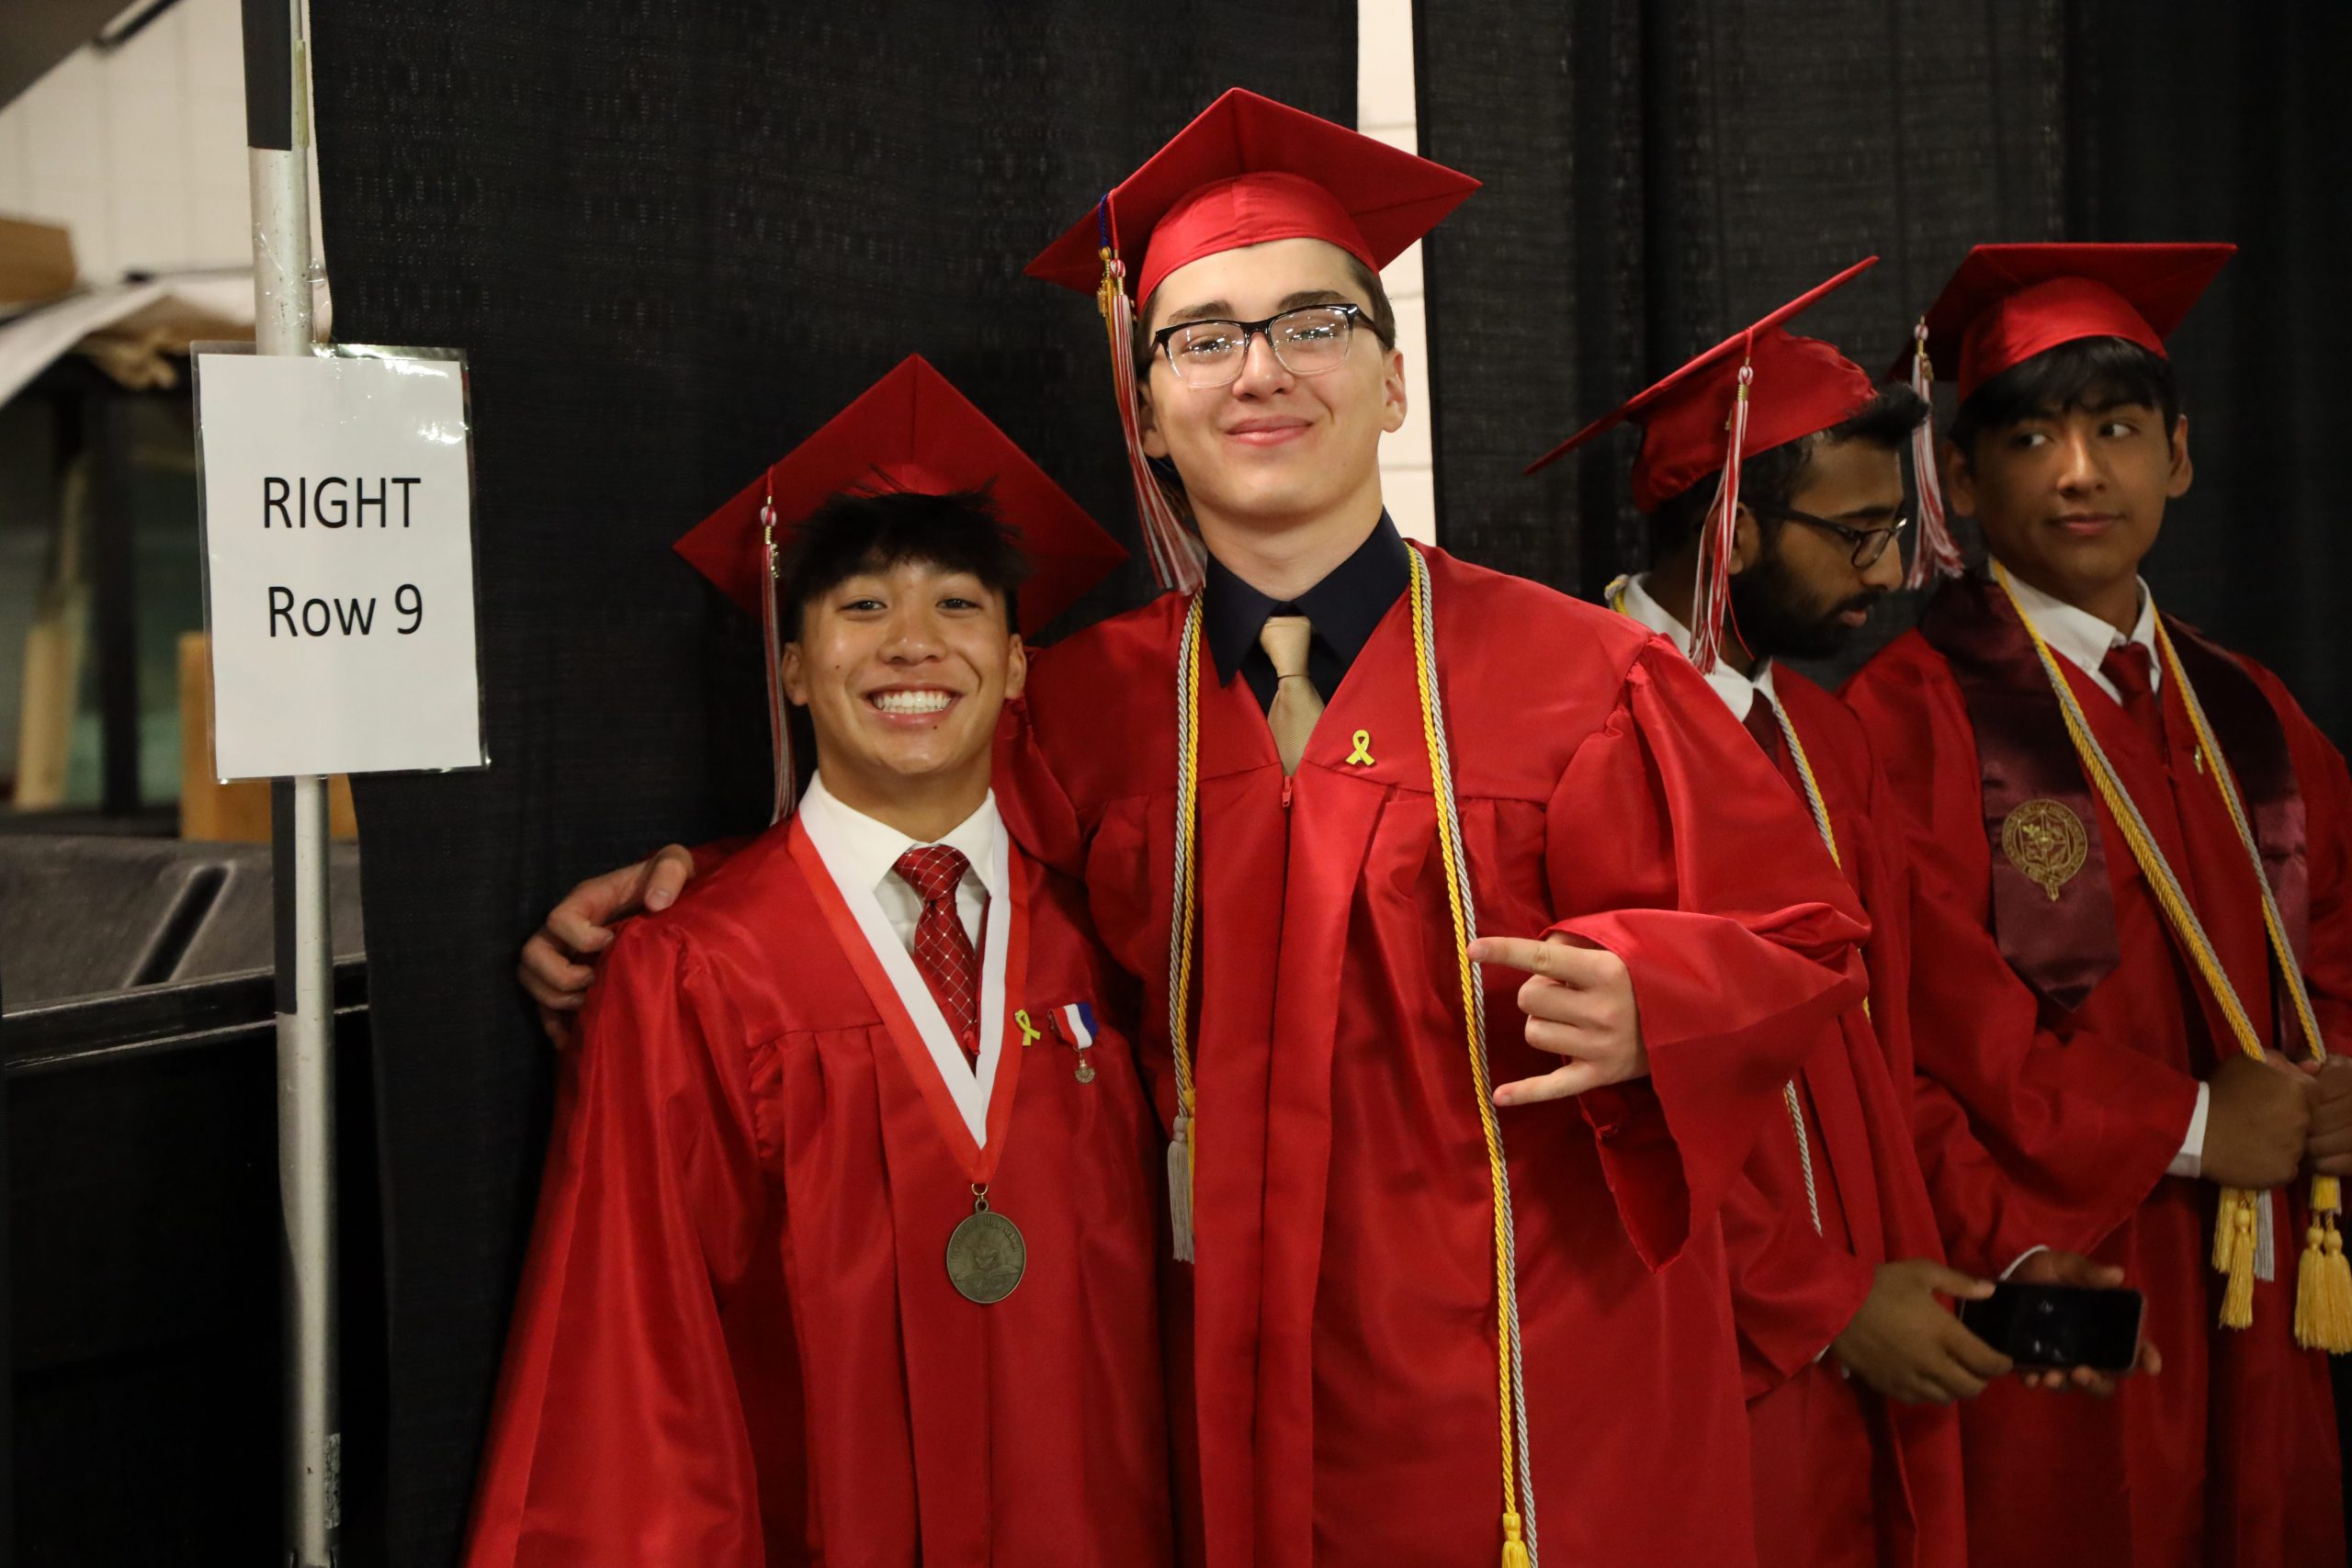 Two graduates wearing red caps and gowns smiling for a photo together. The boy on the left is wearing a medal around his neck, while the boy on the right is wearing a yellow cord around his.